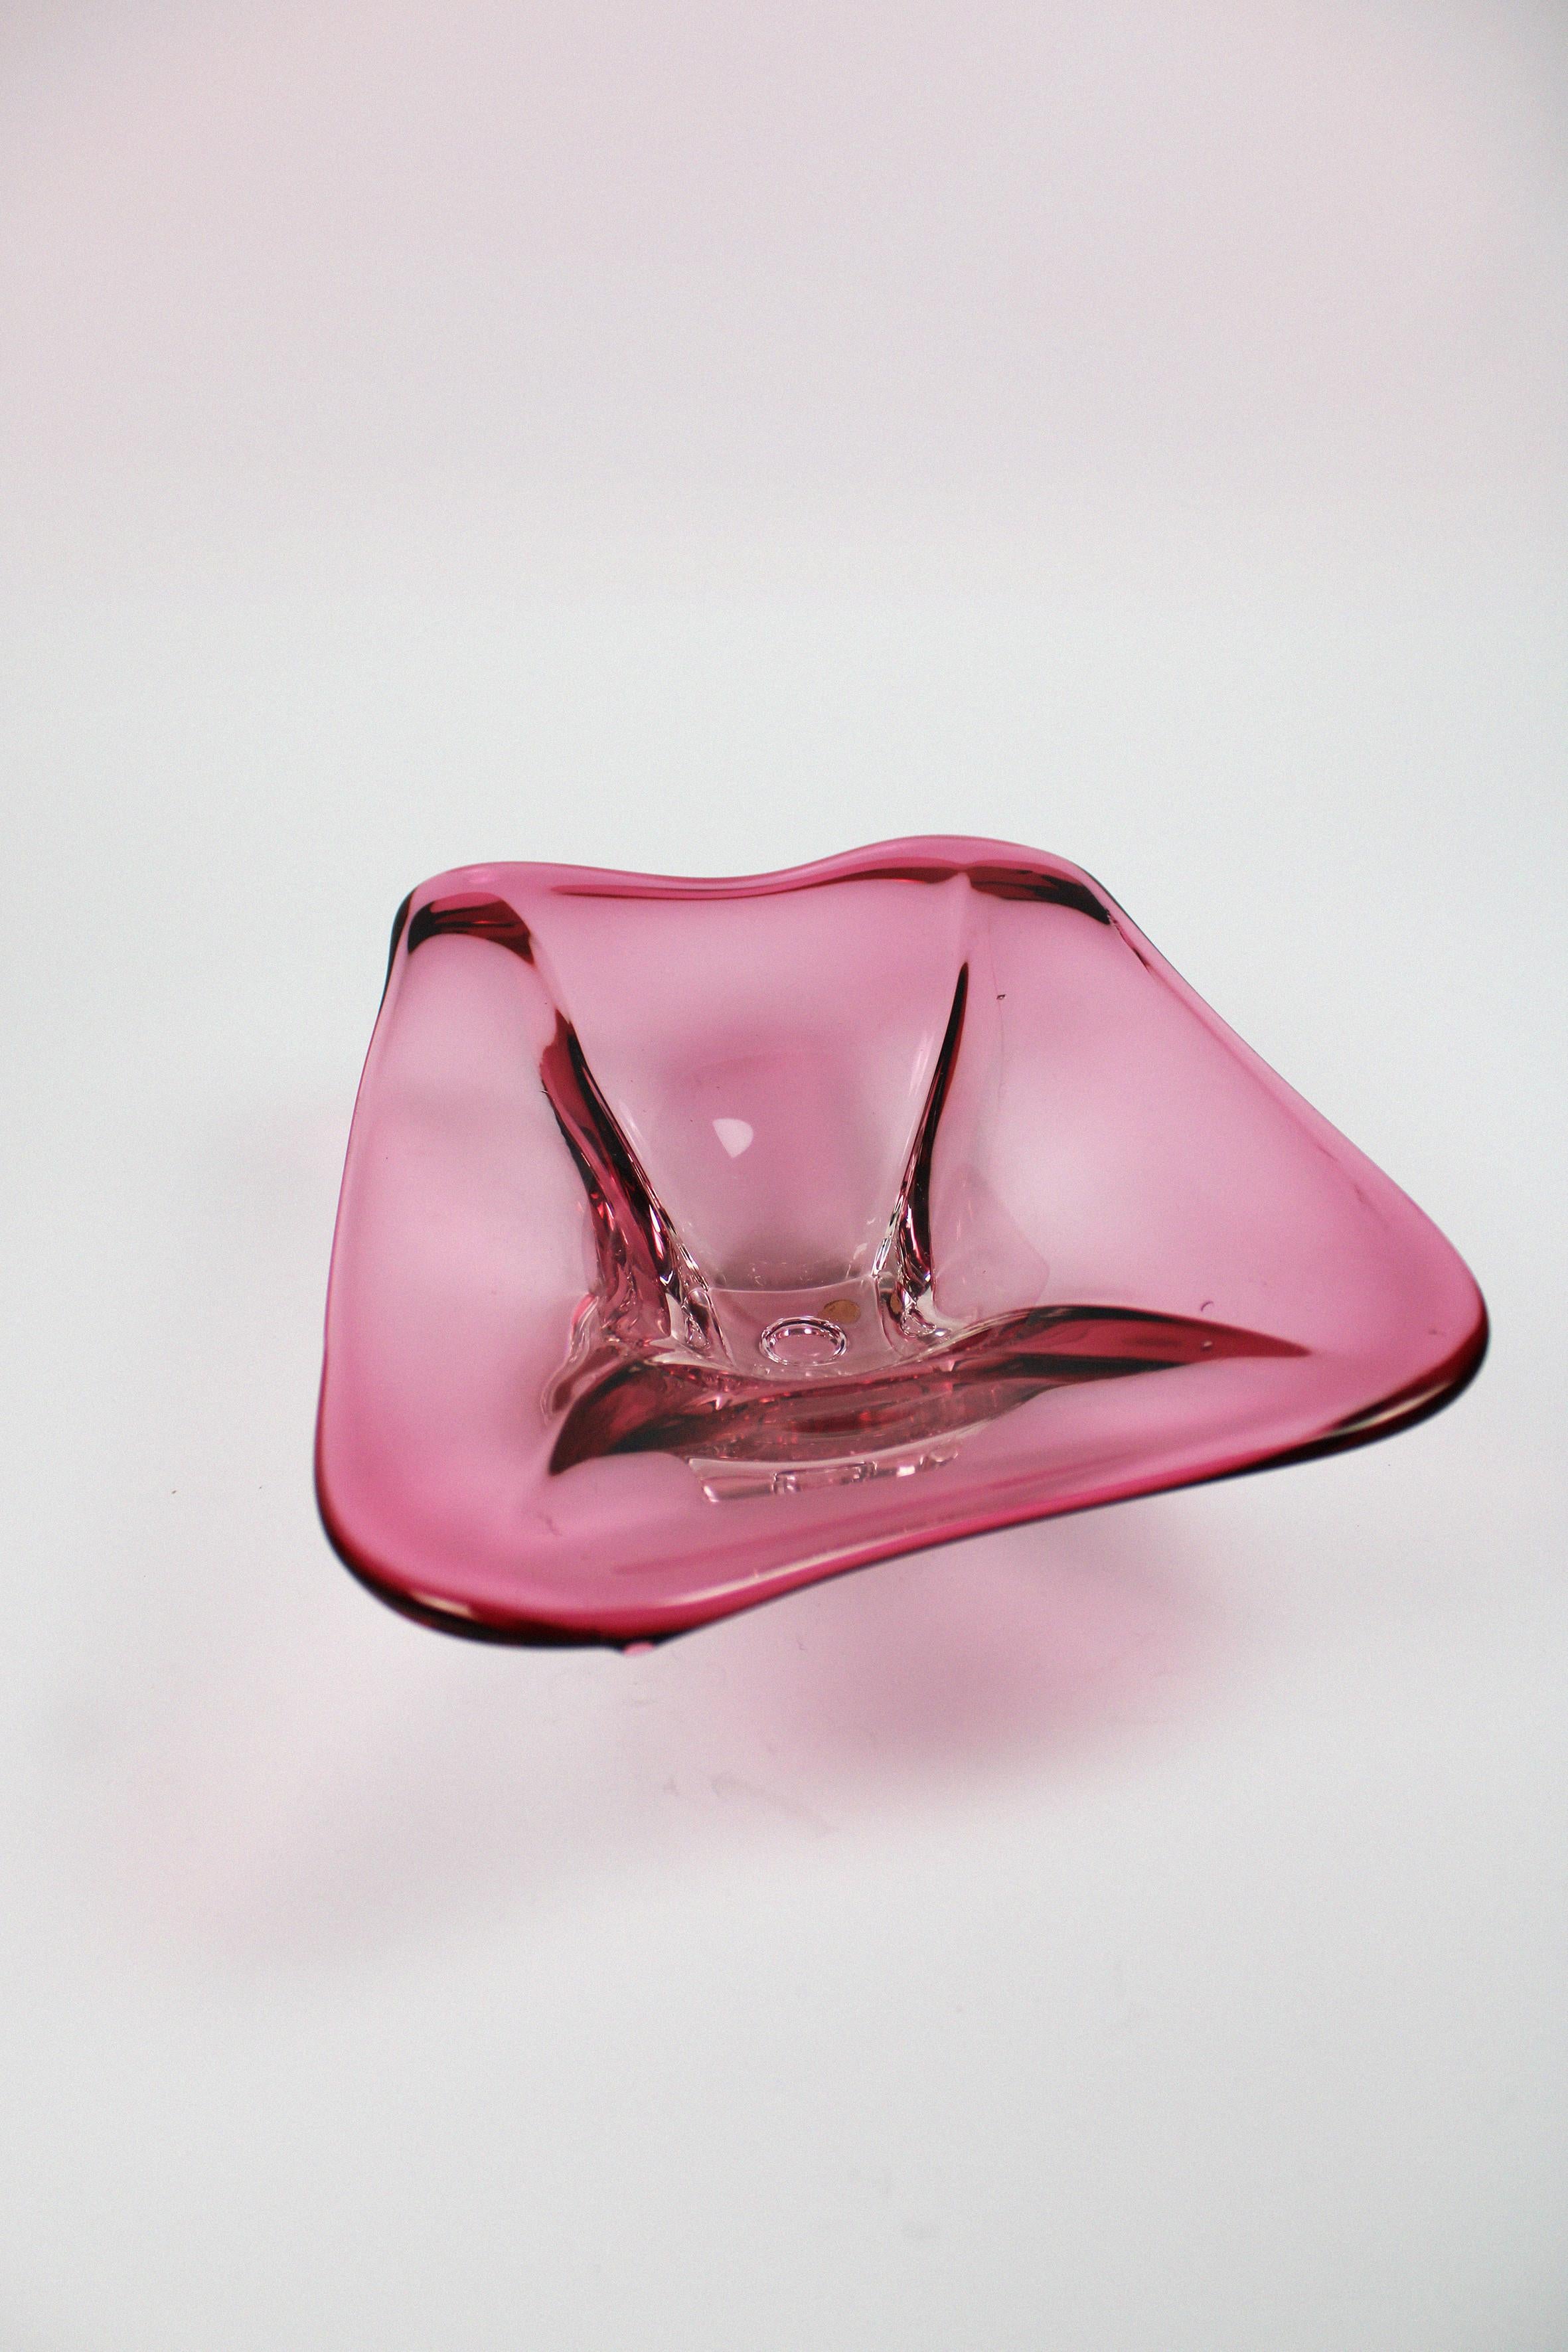 Hand-Crafted Murano Glass Bowl Glass Pink Sommerso Art Handblown Vintage Italy 20th century For Sale